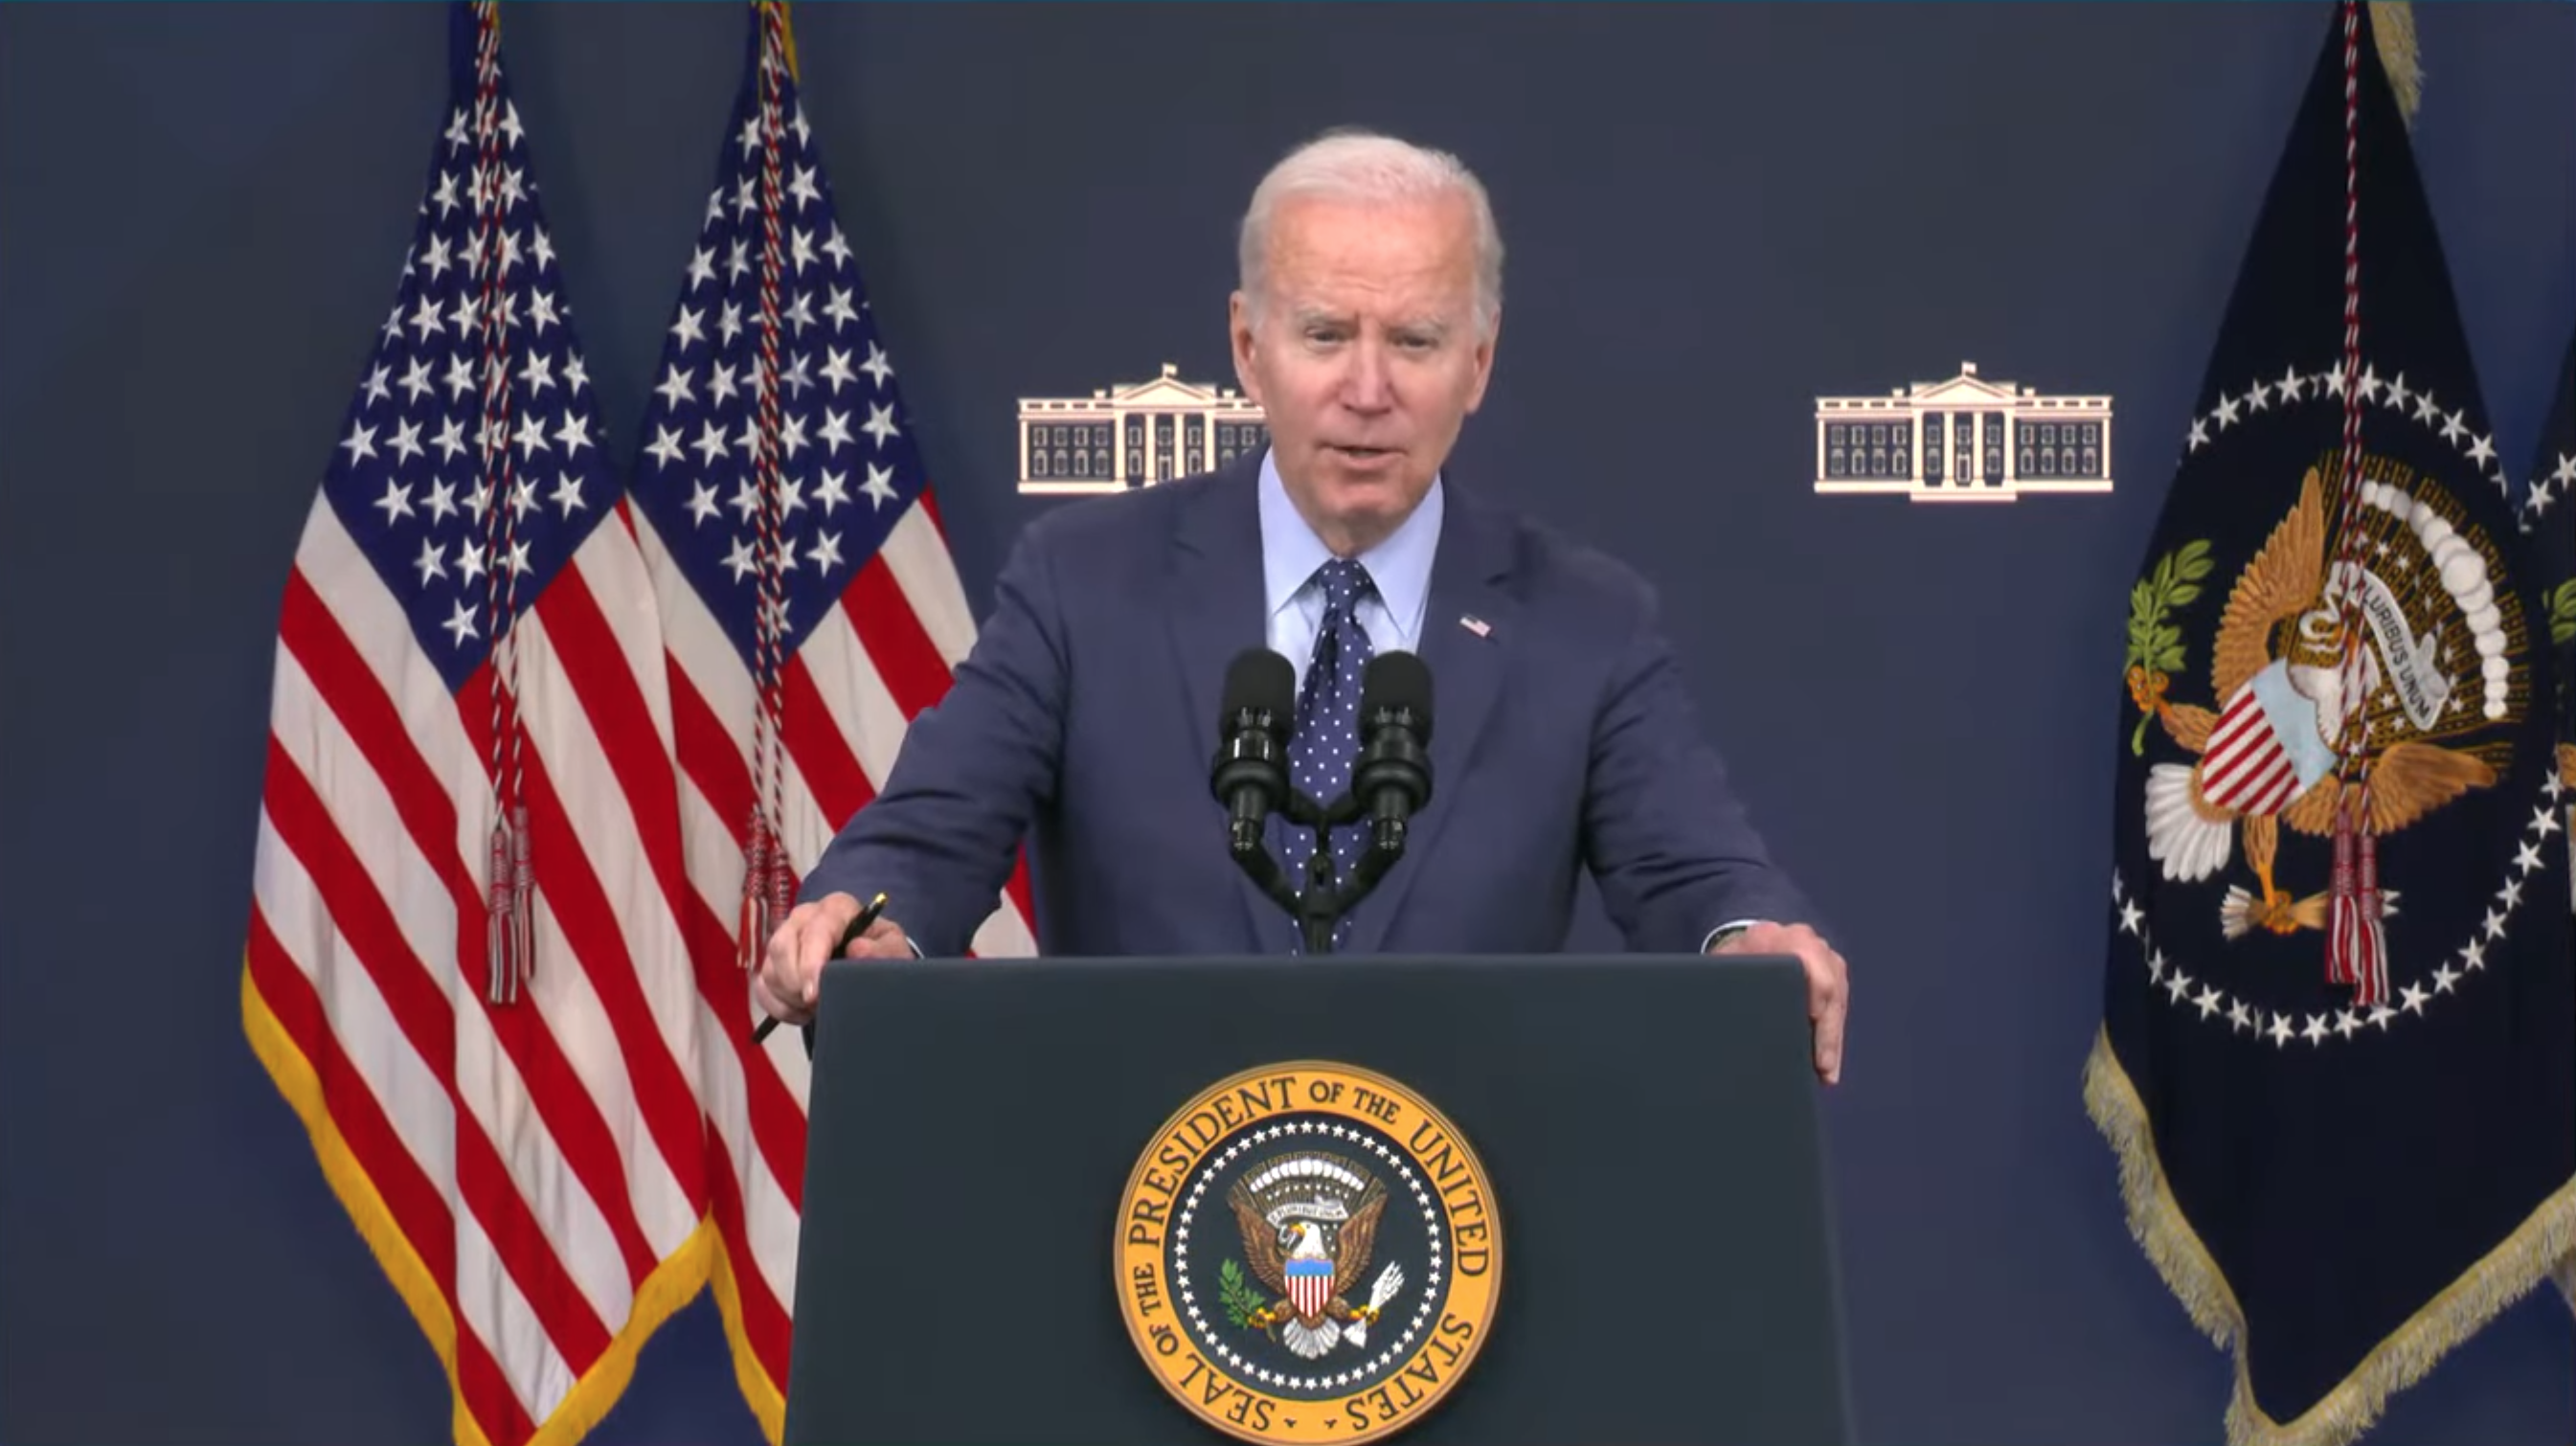 Biden: Three Downed Objects Were For Research, Not Chinese Surveillance